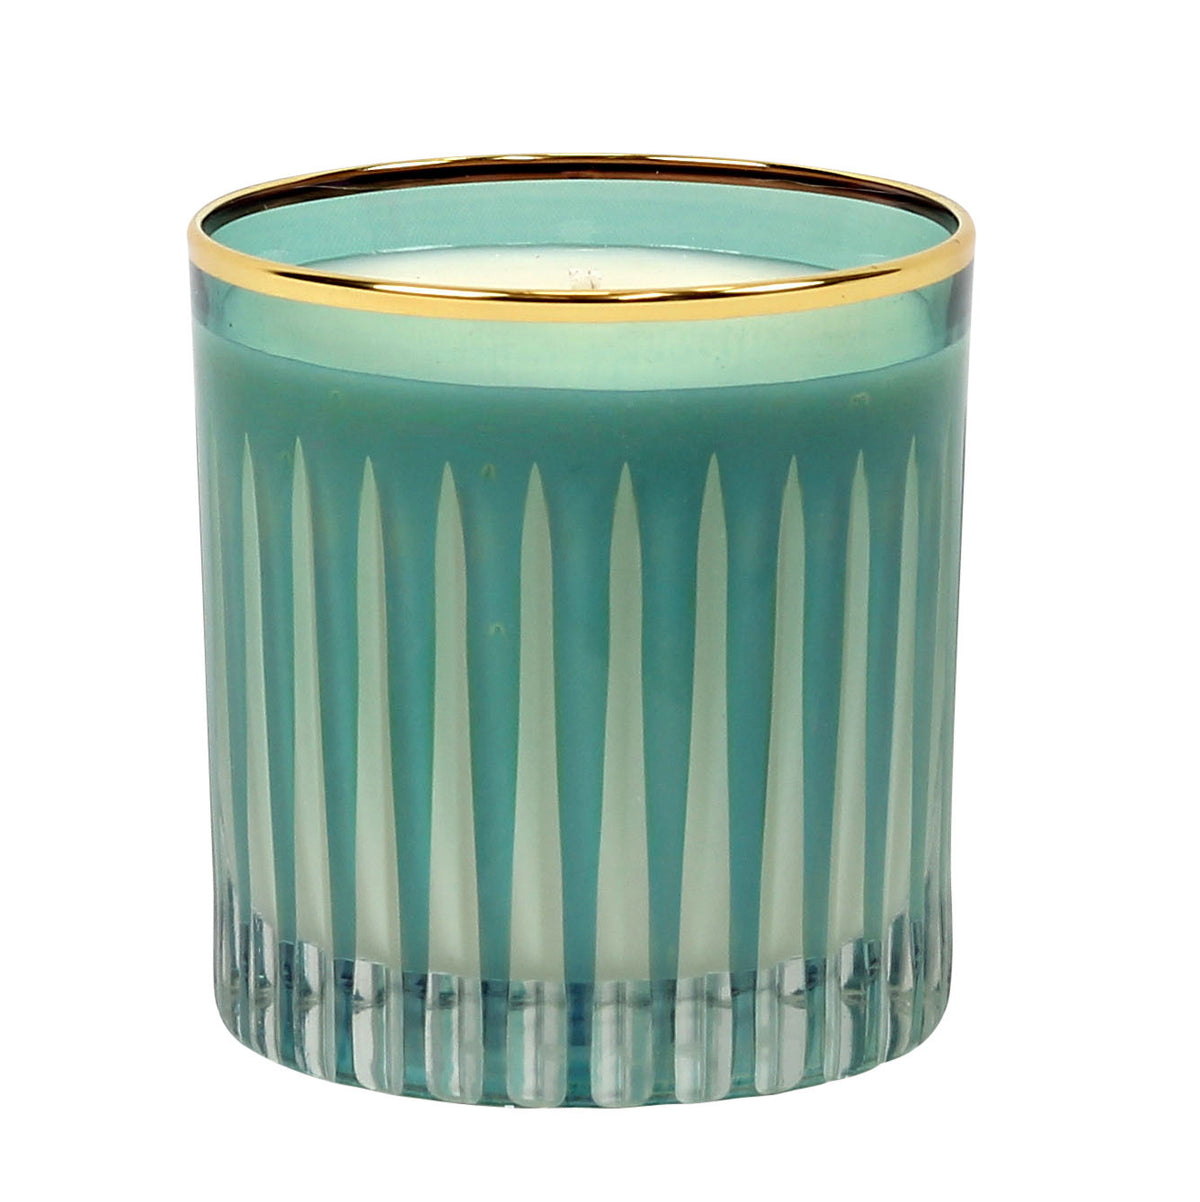 CRYSTAL CANDLES: Scented soy candle in hand engraved GREEN crystal cup ~ Blue Spruce scent - Artistica.com